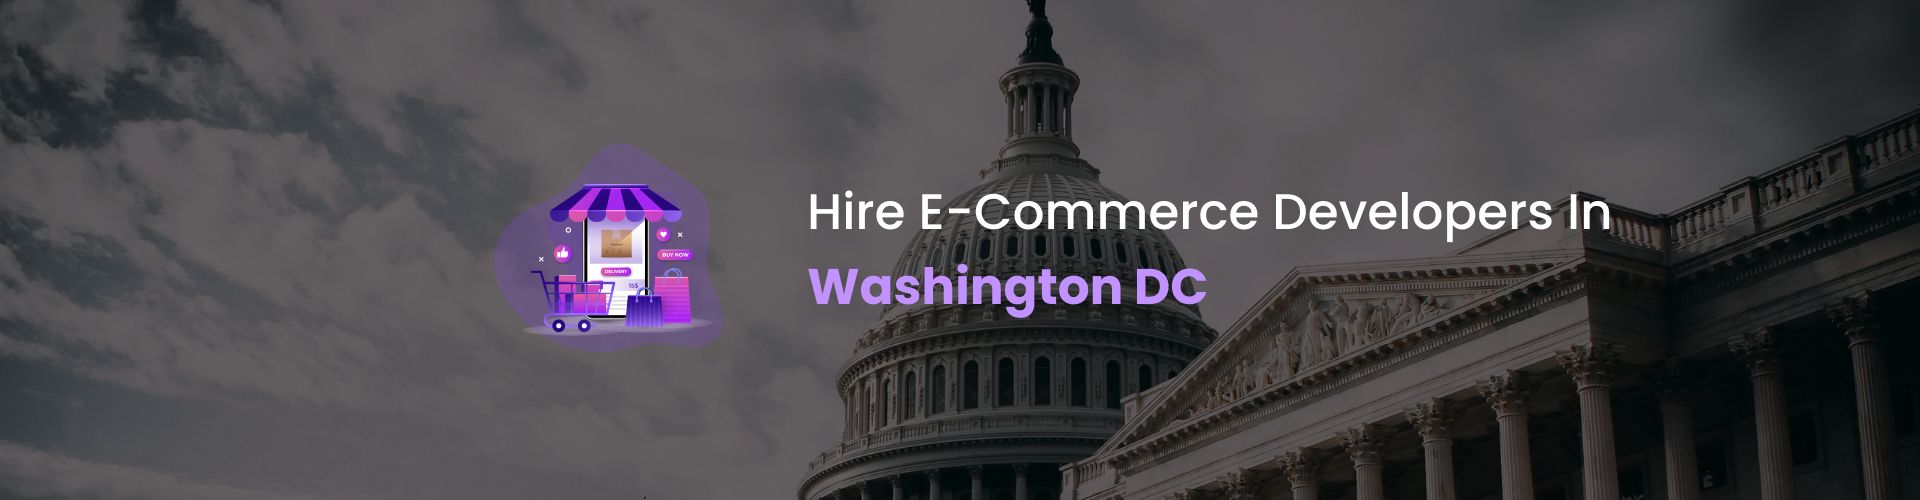 hire ecommerce developers in washington dc